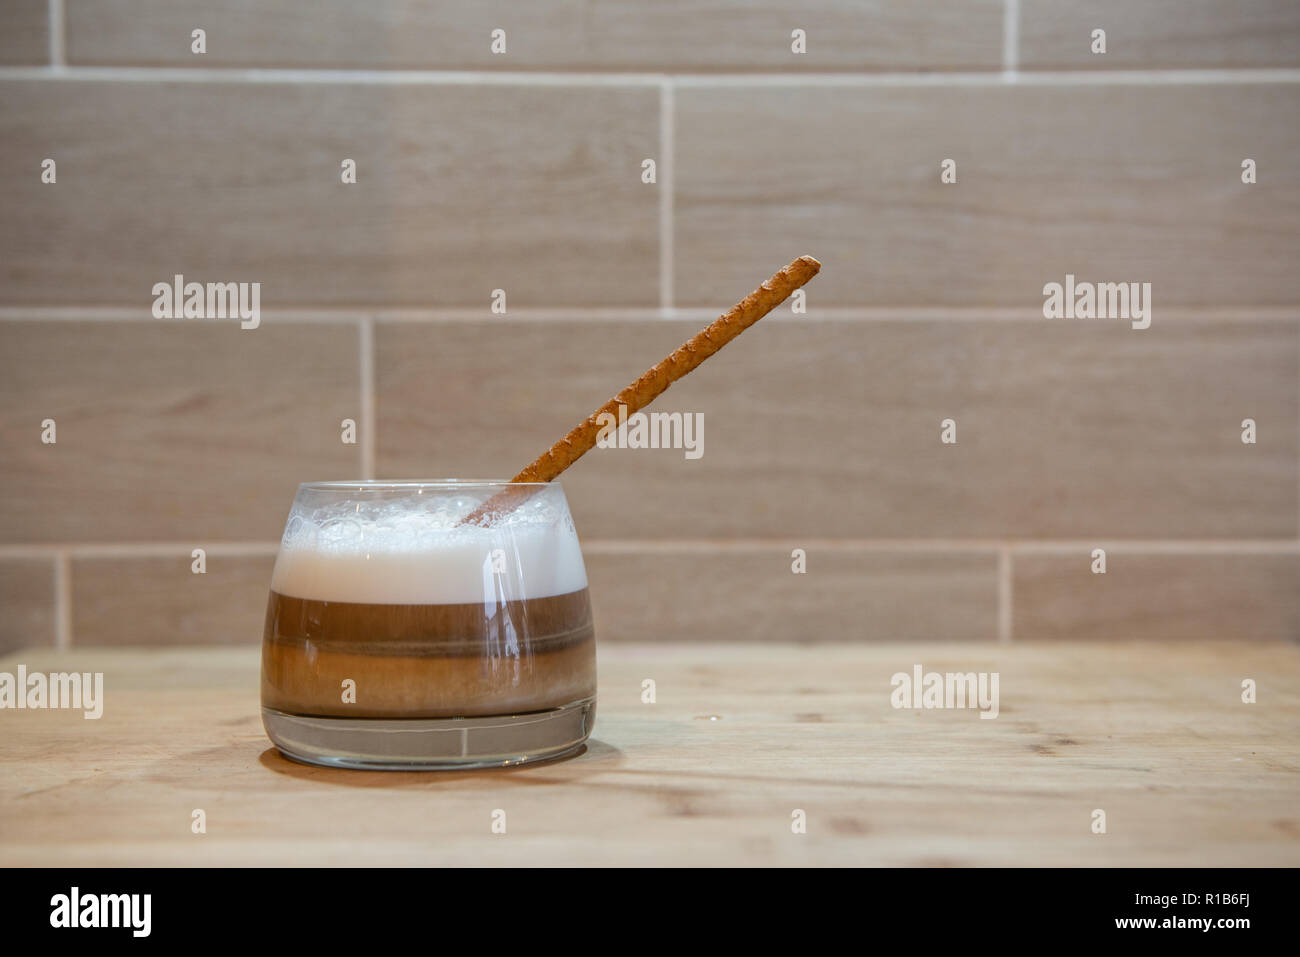 multilayer coffee or cappuccino in a glass cup with bread straw Stock Photo